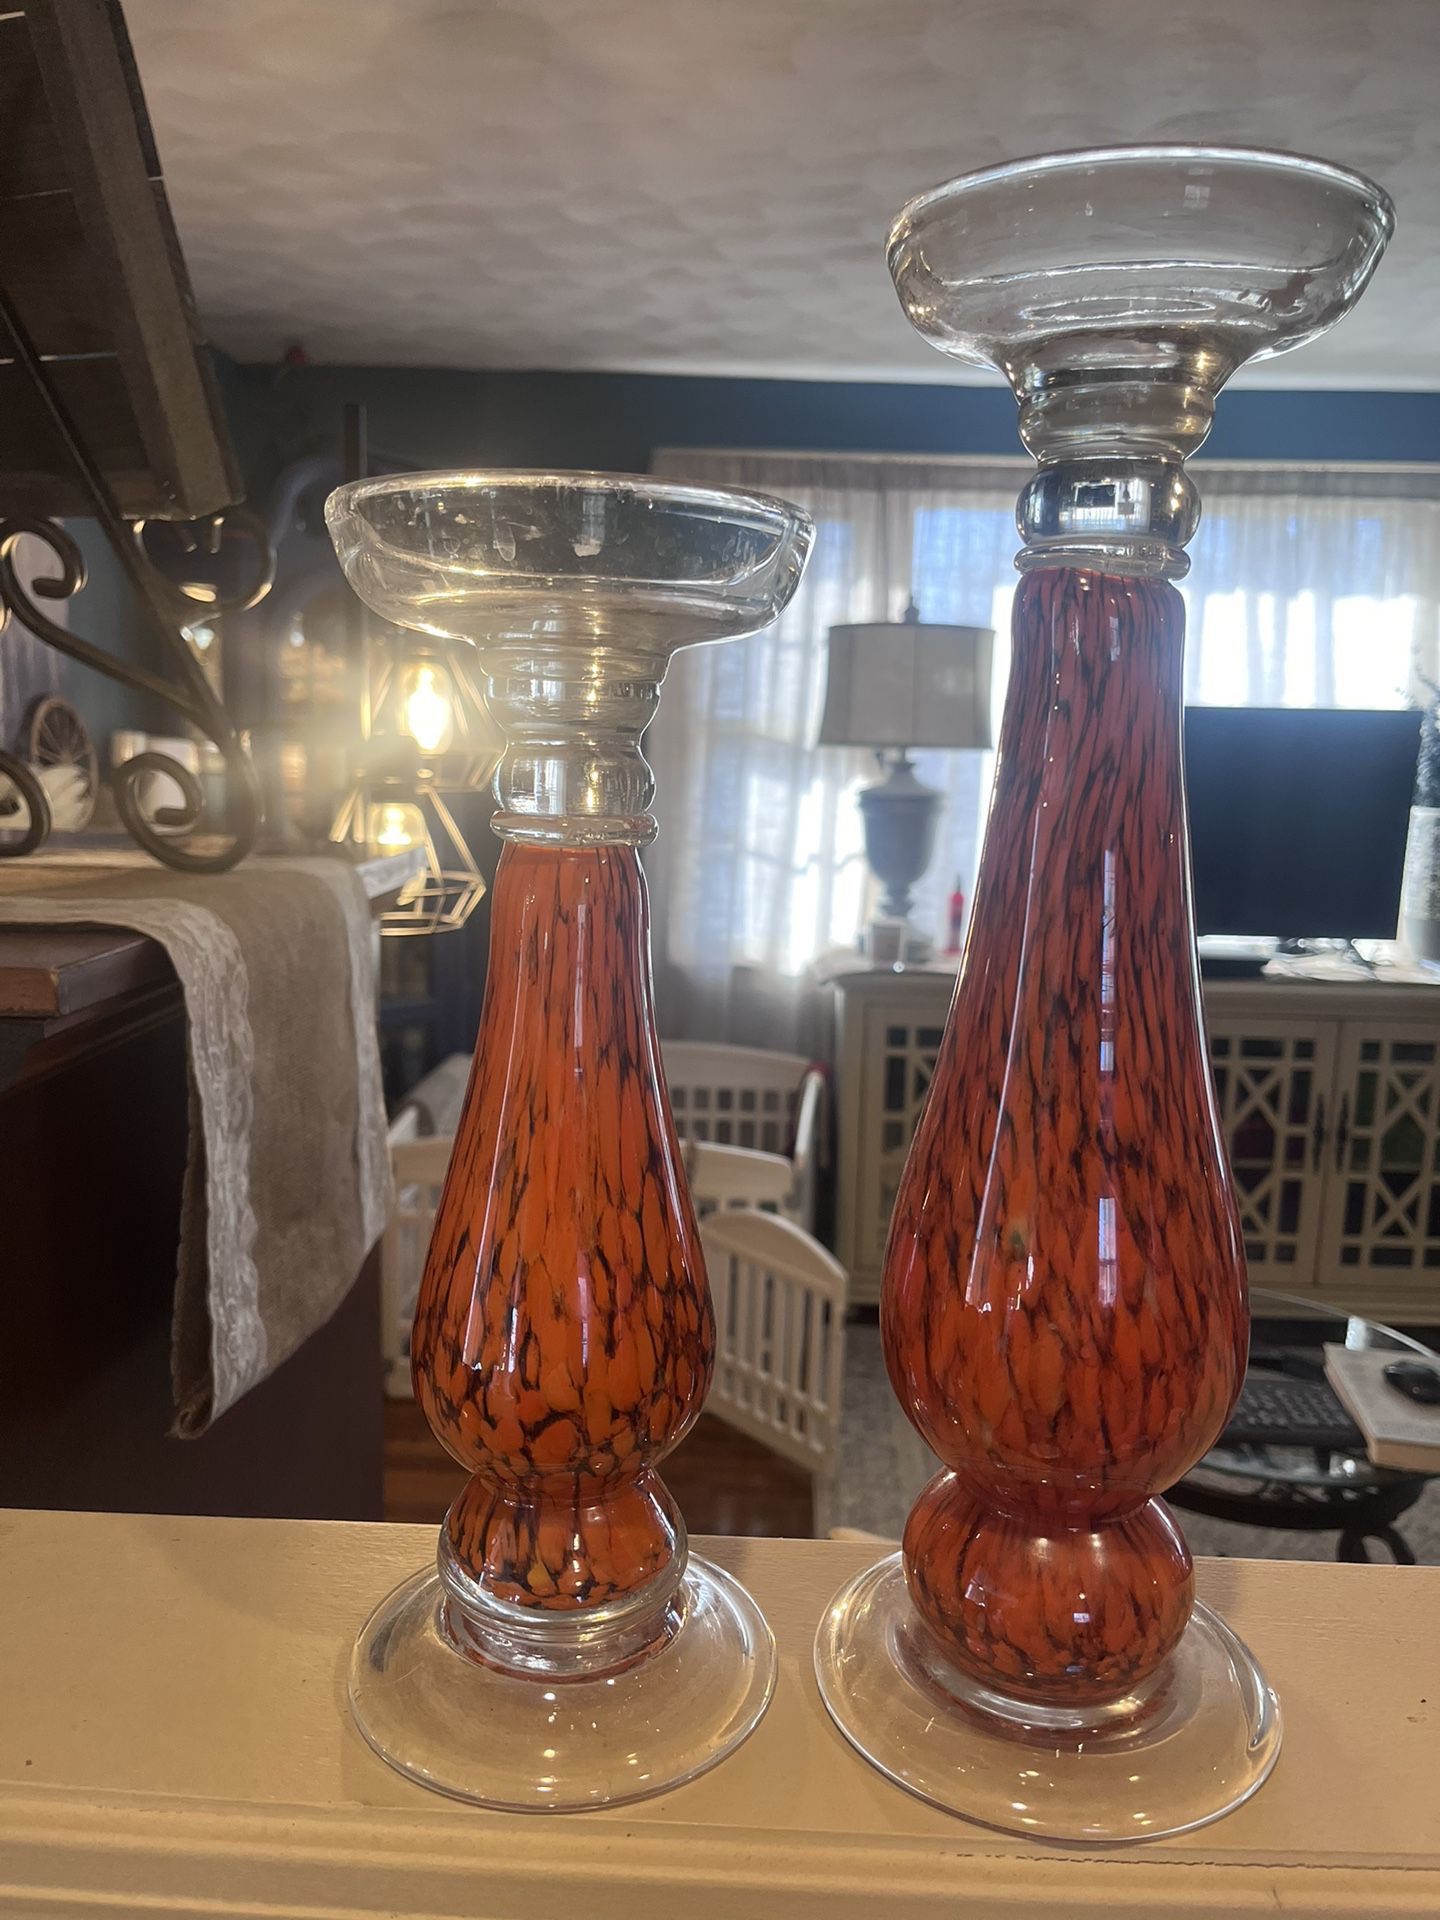 Candle Holders Orange Glass from Pier 1